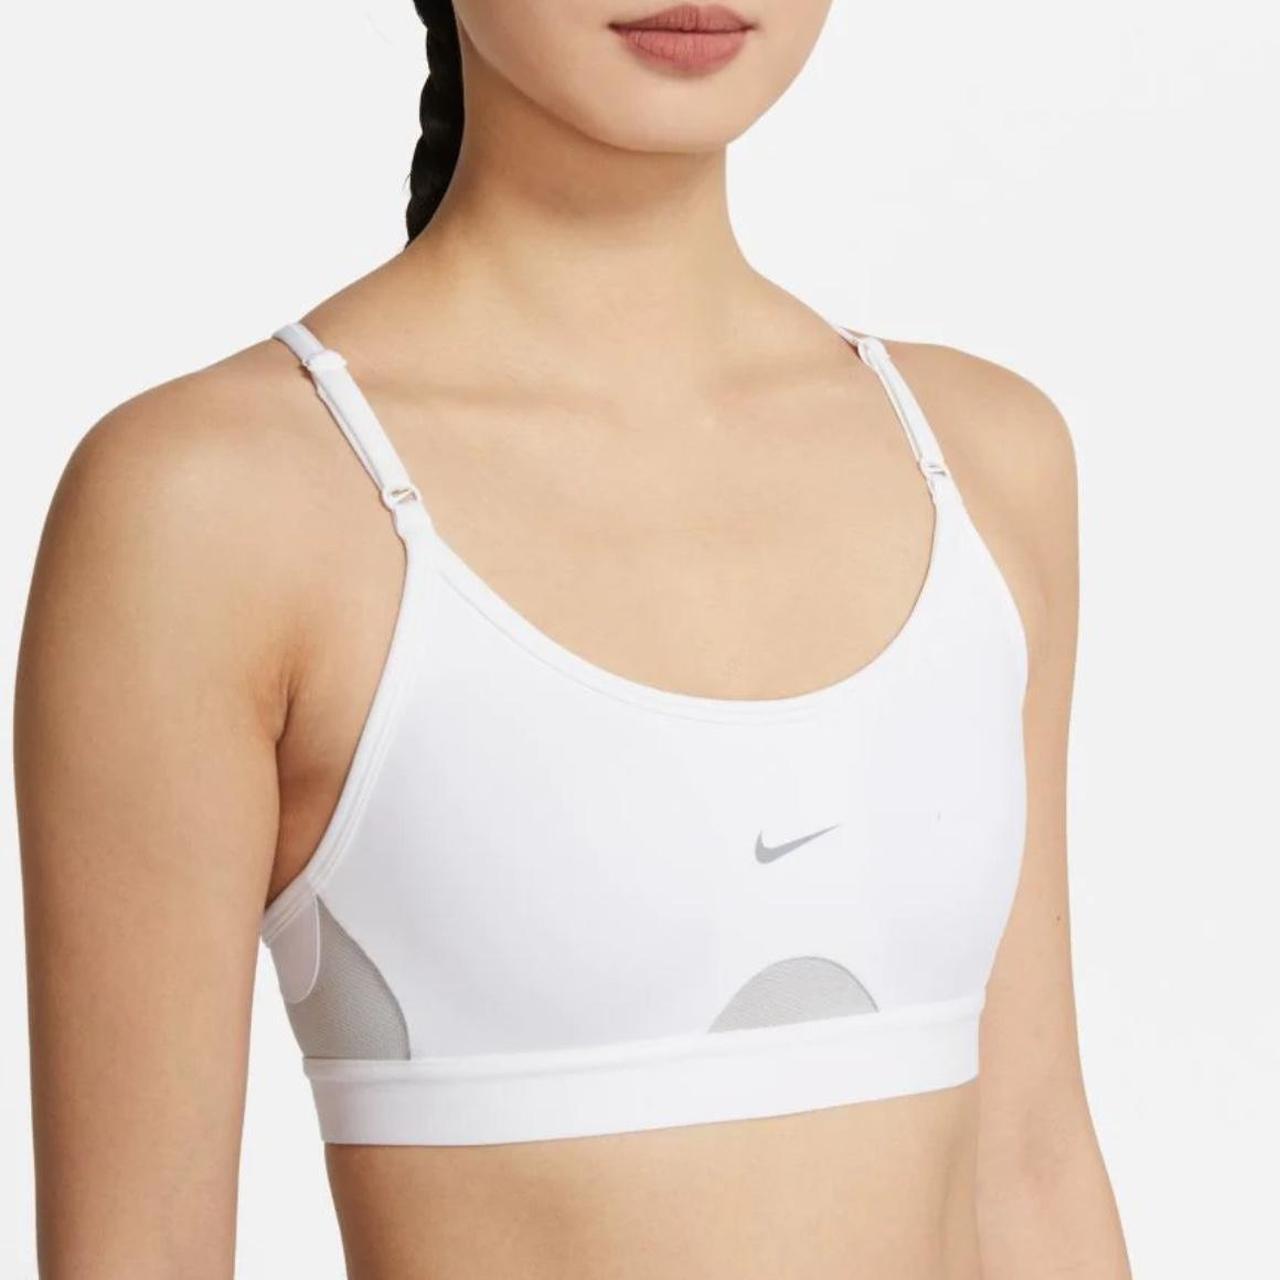 NIKE halter sports bra with mesh back! Recommended - Depop